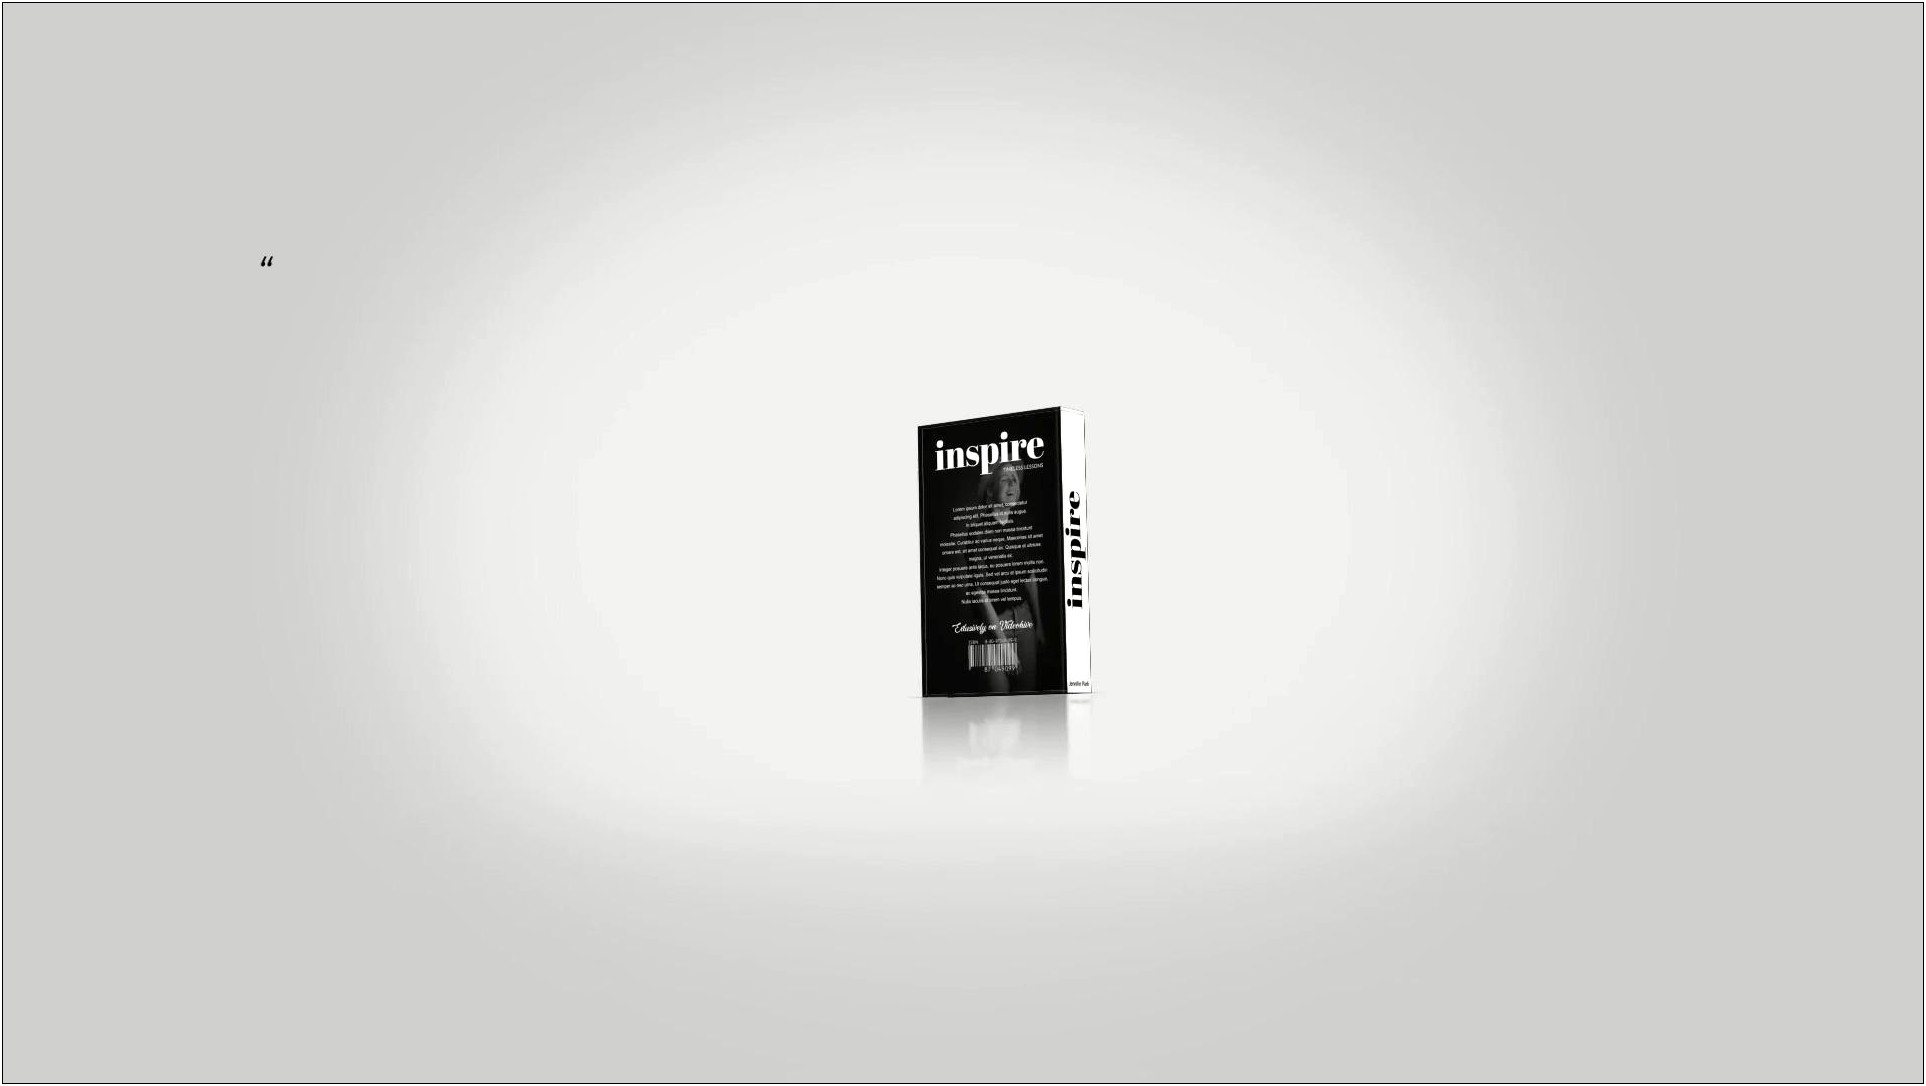 Book Promo After Effects Template Free